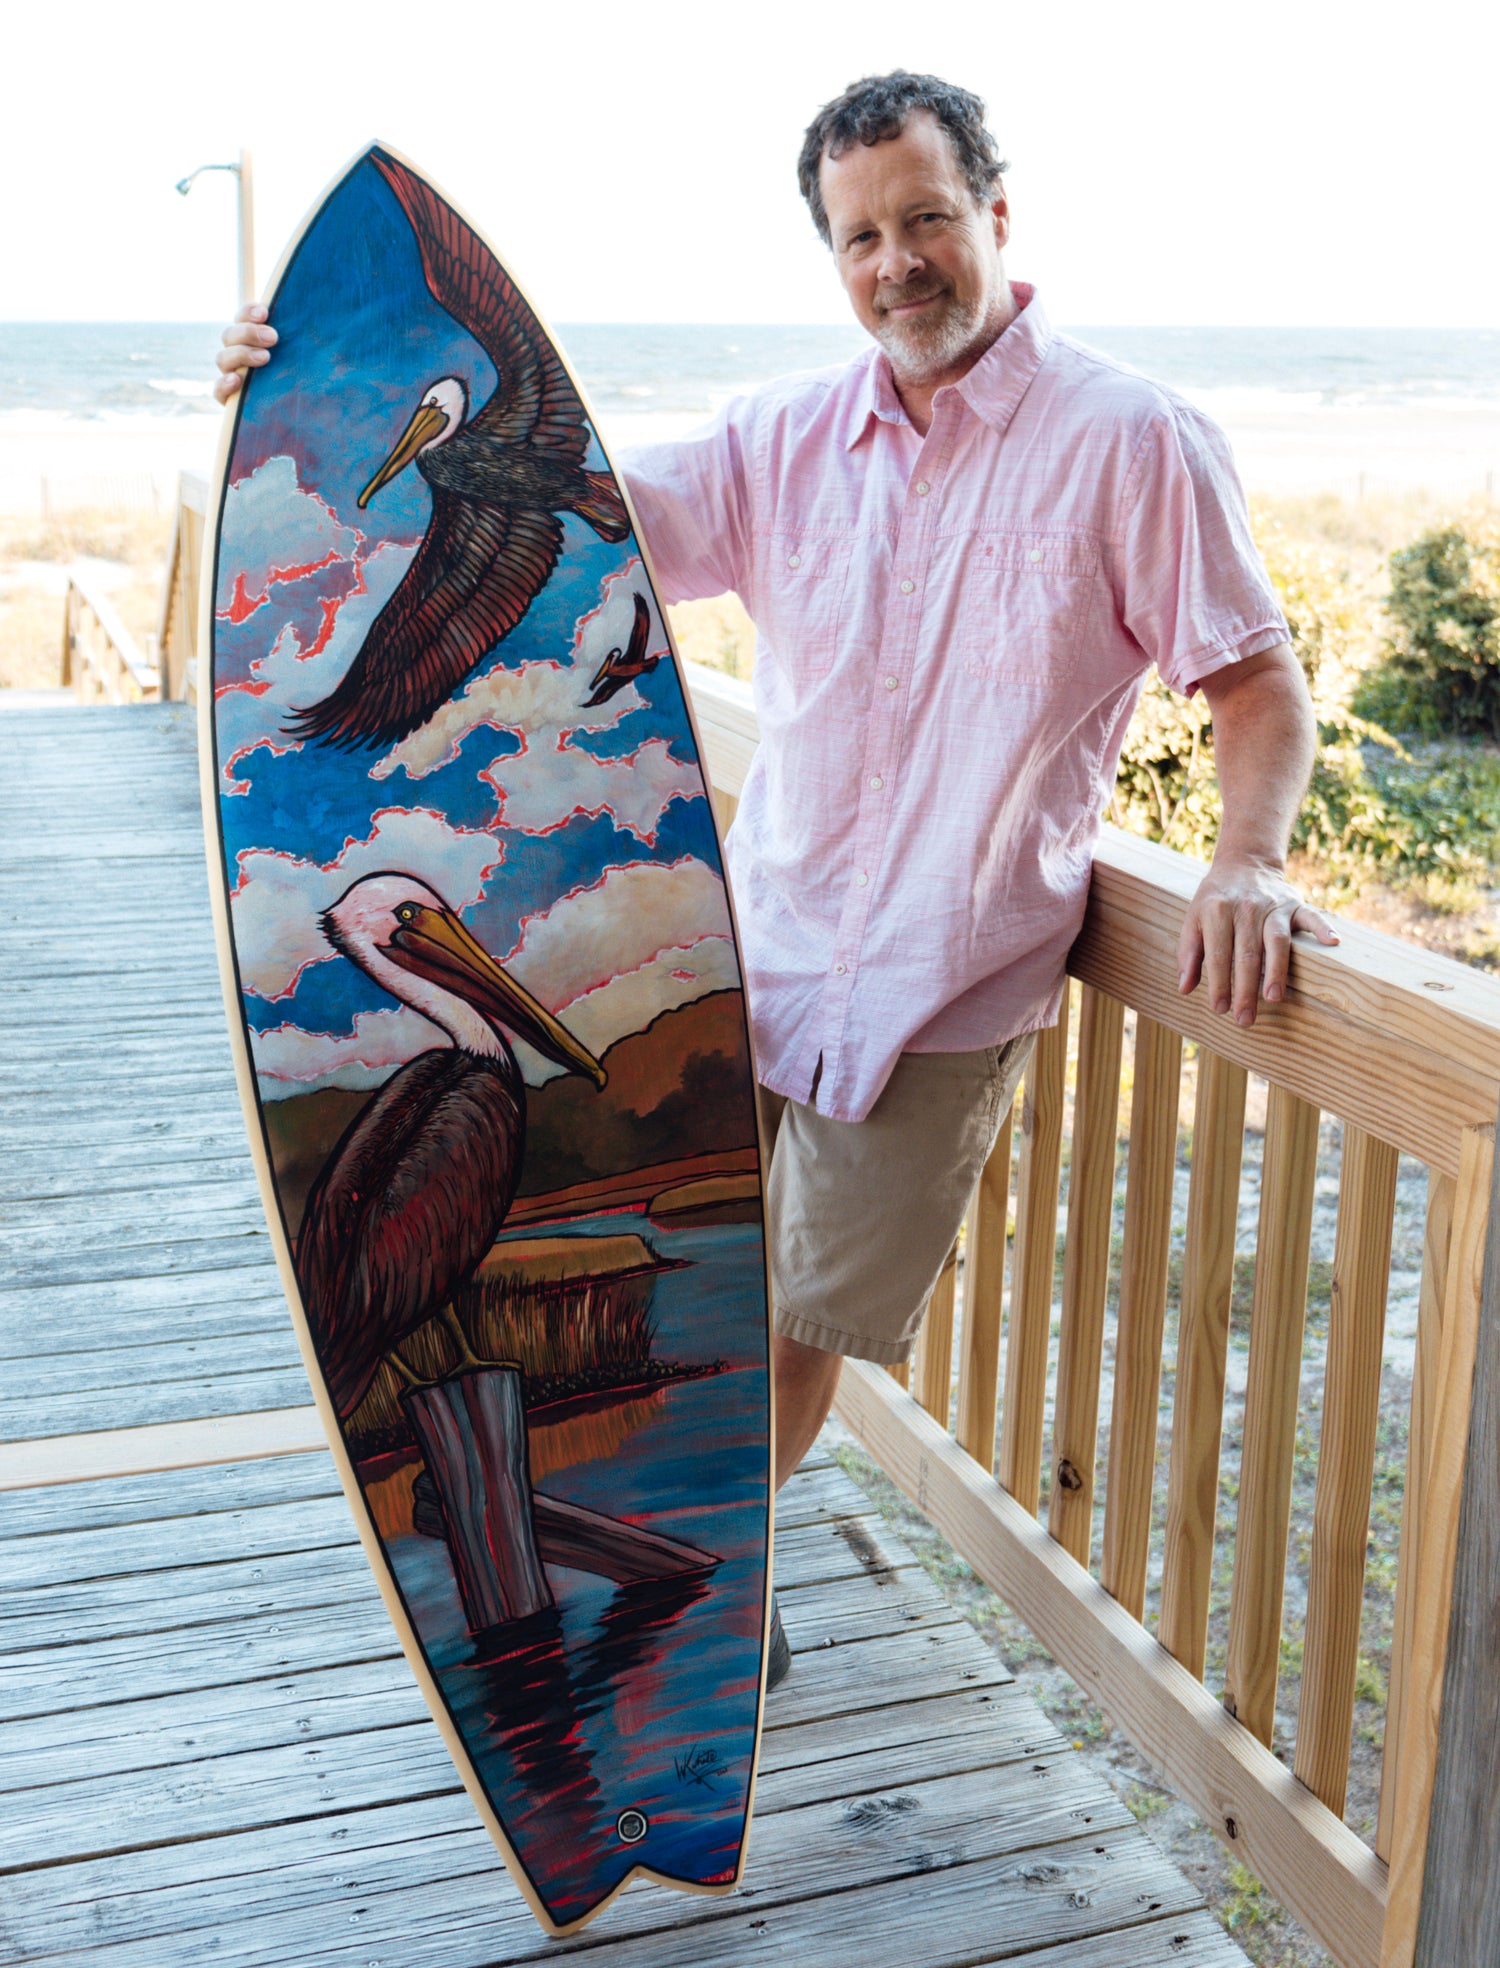 William Keith White Artist holding custom painted surfboard